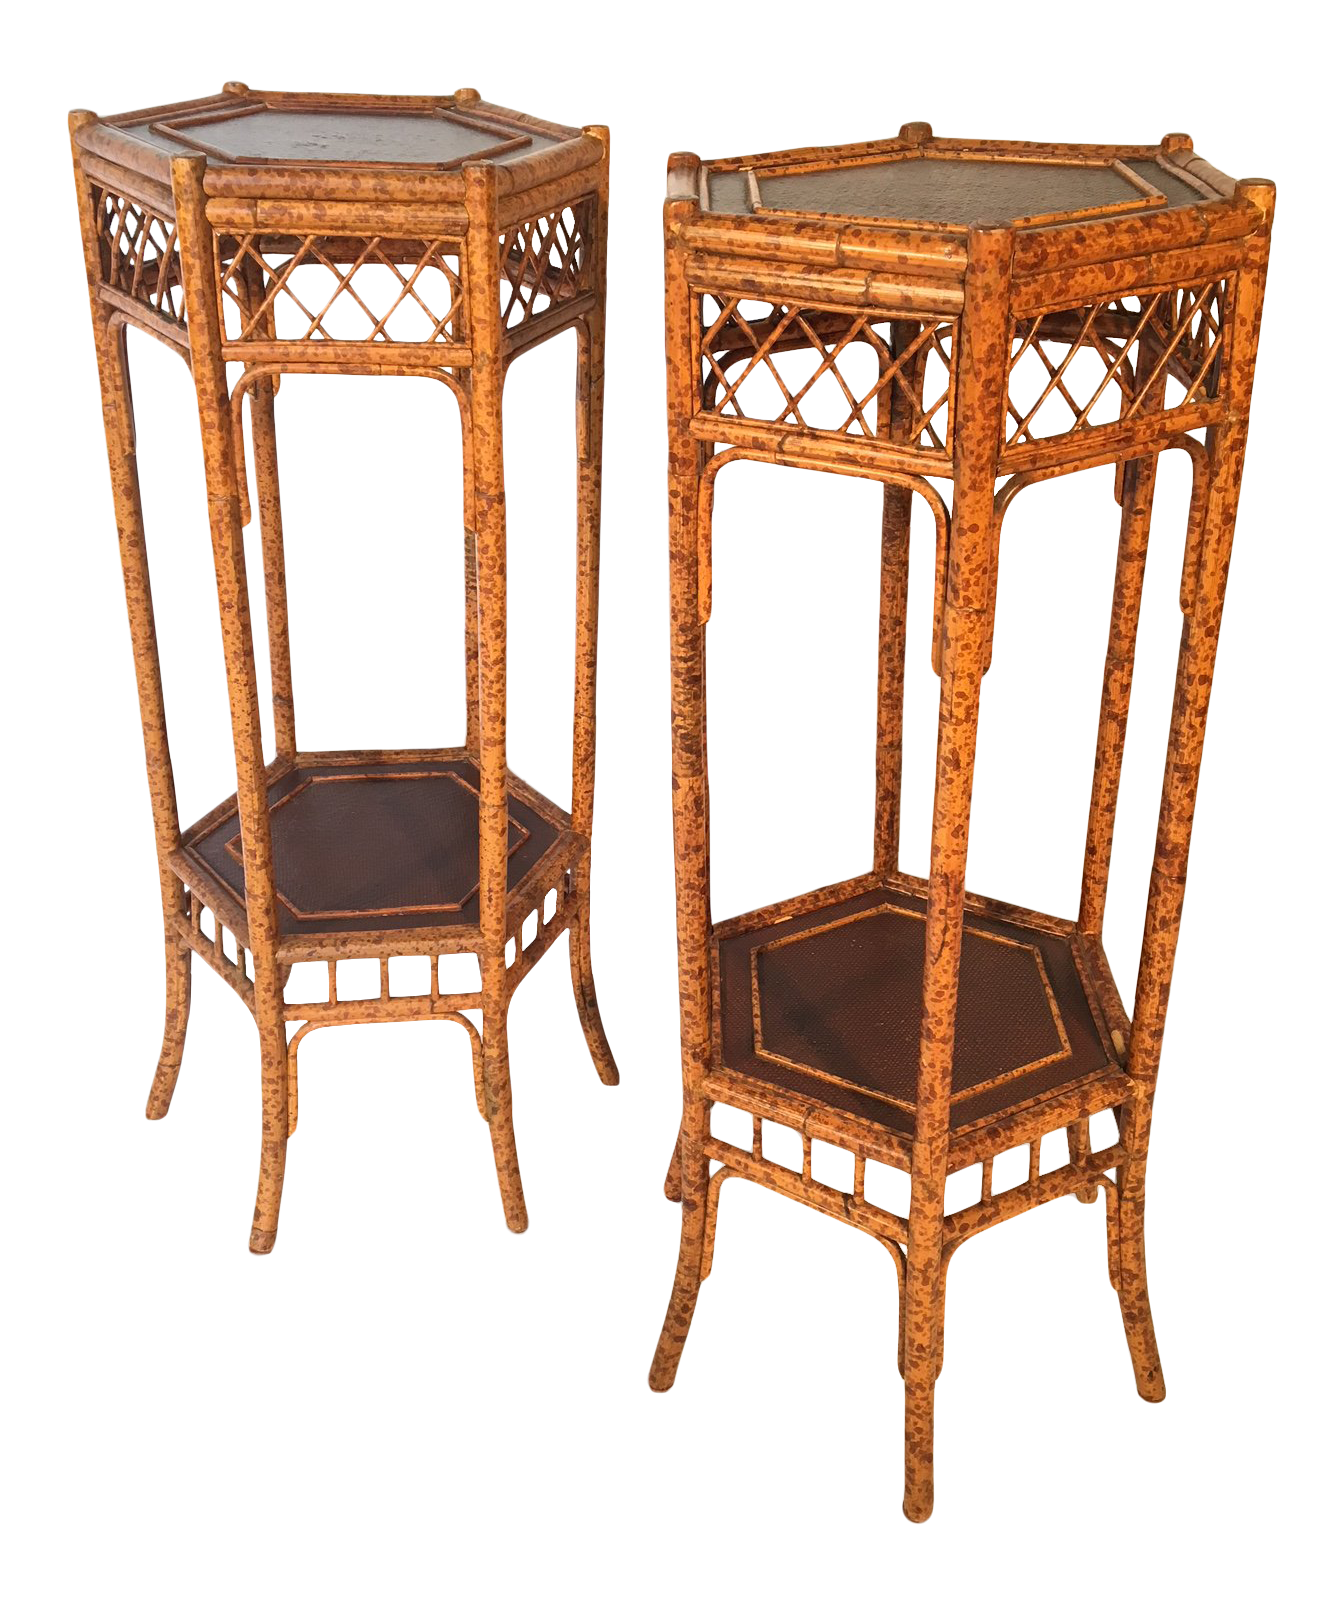 Pair of Spotted Bamboo Plant Stands